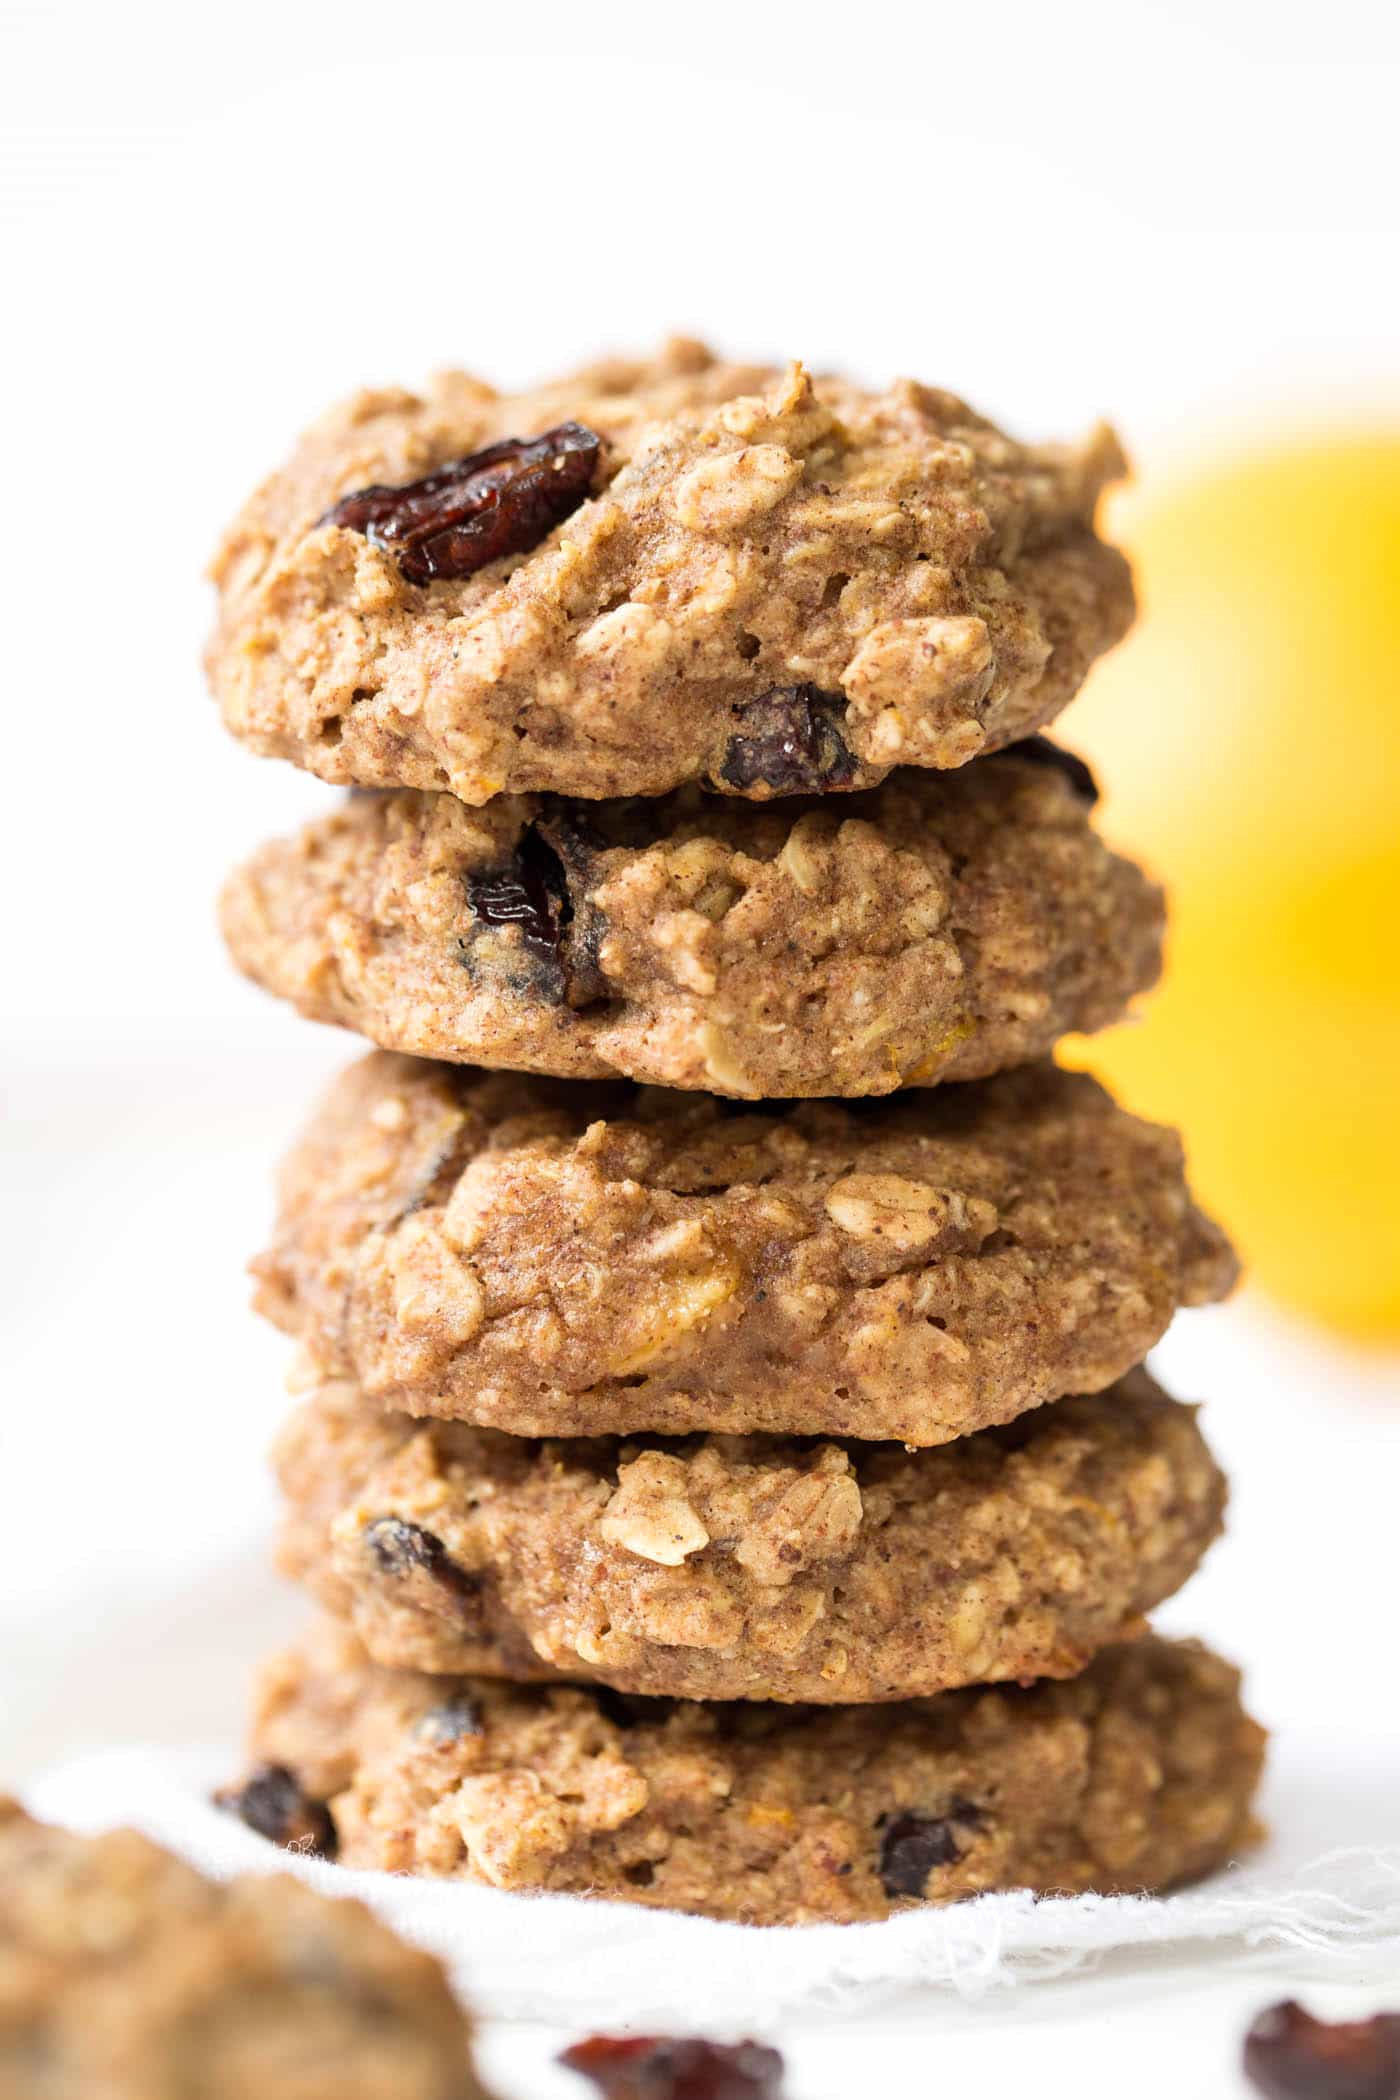 Cranberry Orange Quinoa Breakfast Cookies made in just one bowl, packed with nutrition and naturally gluten-free & vegan!